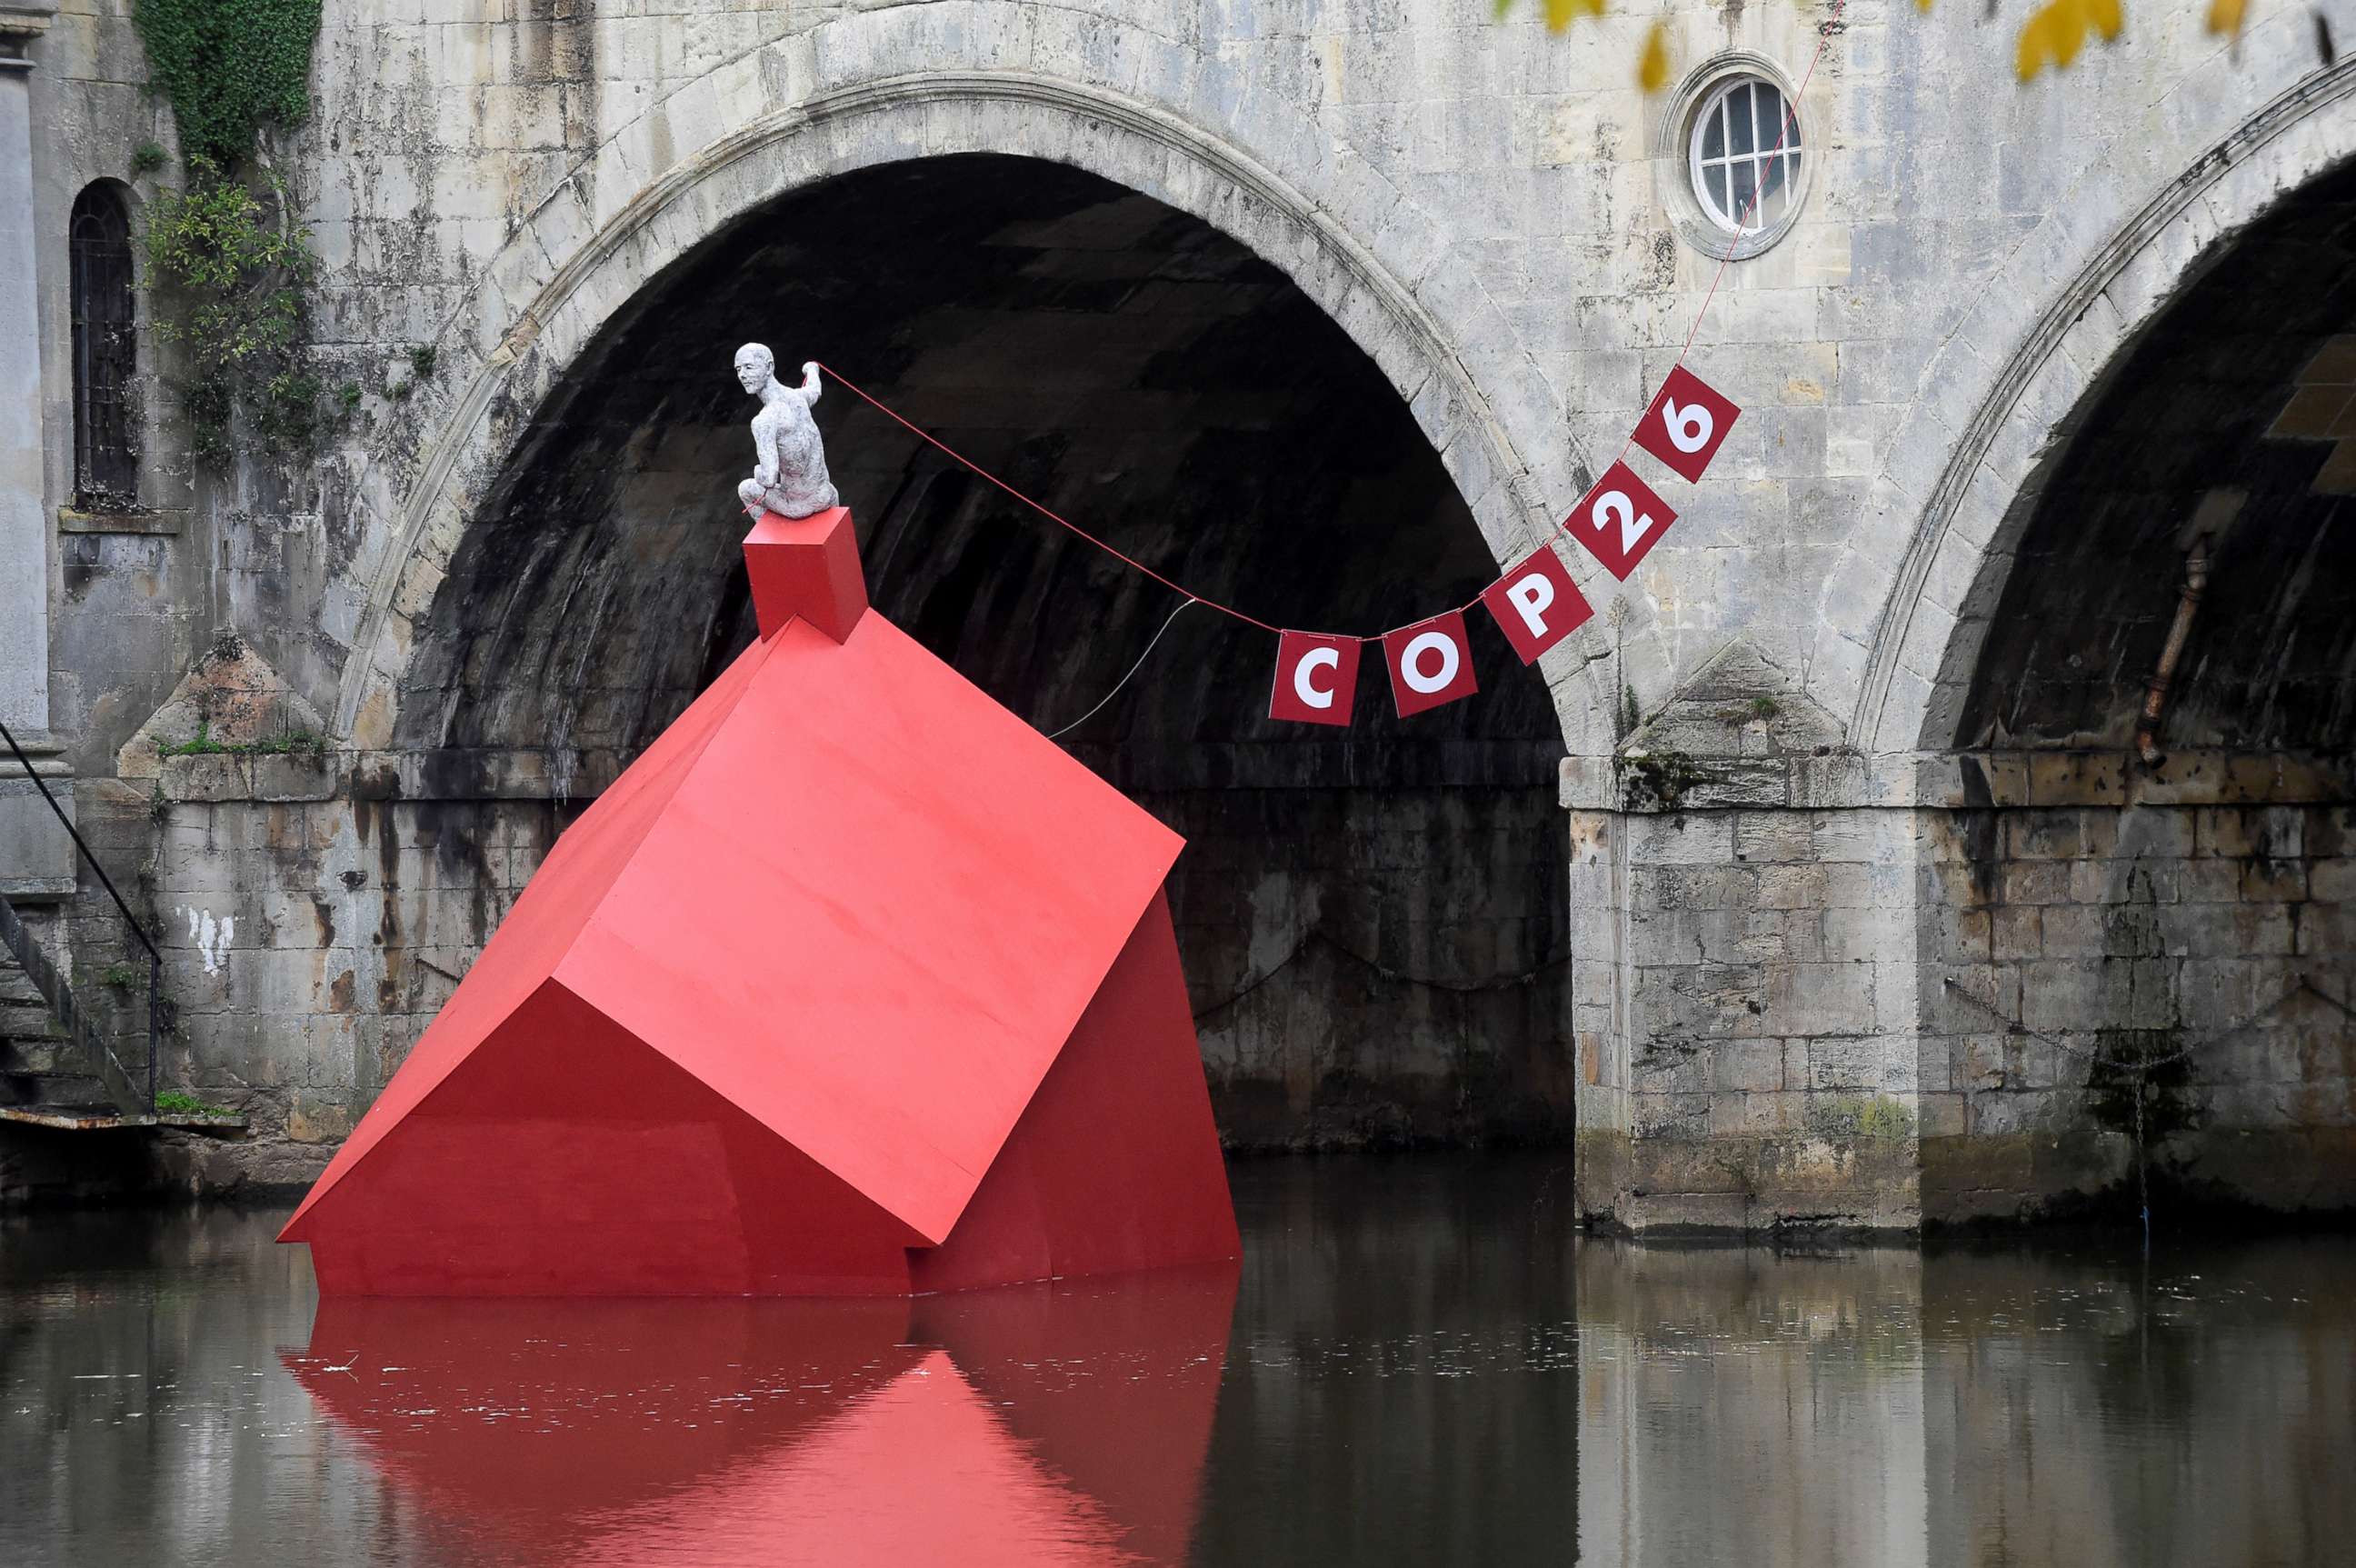 PHOTO: An installation of a 'Sinking House' partly submerged to highlight climate change ahead of COP26, in Bath, Britain, Oct. 26, 2021.